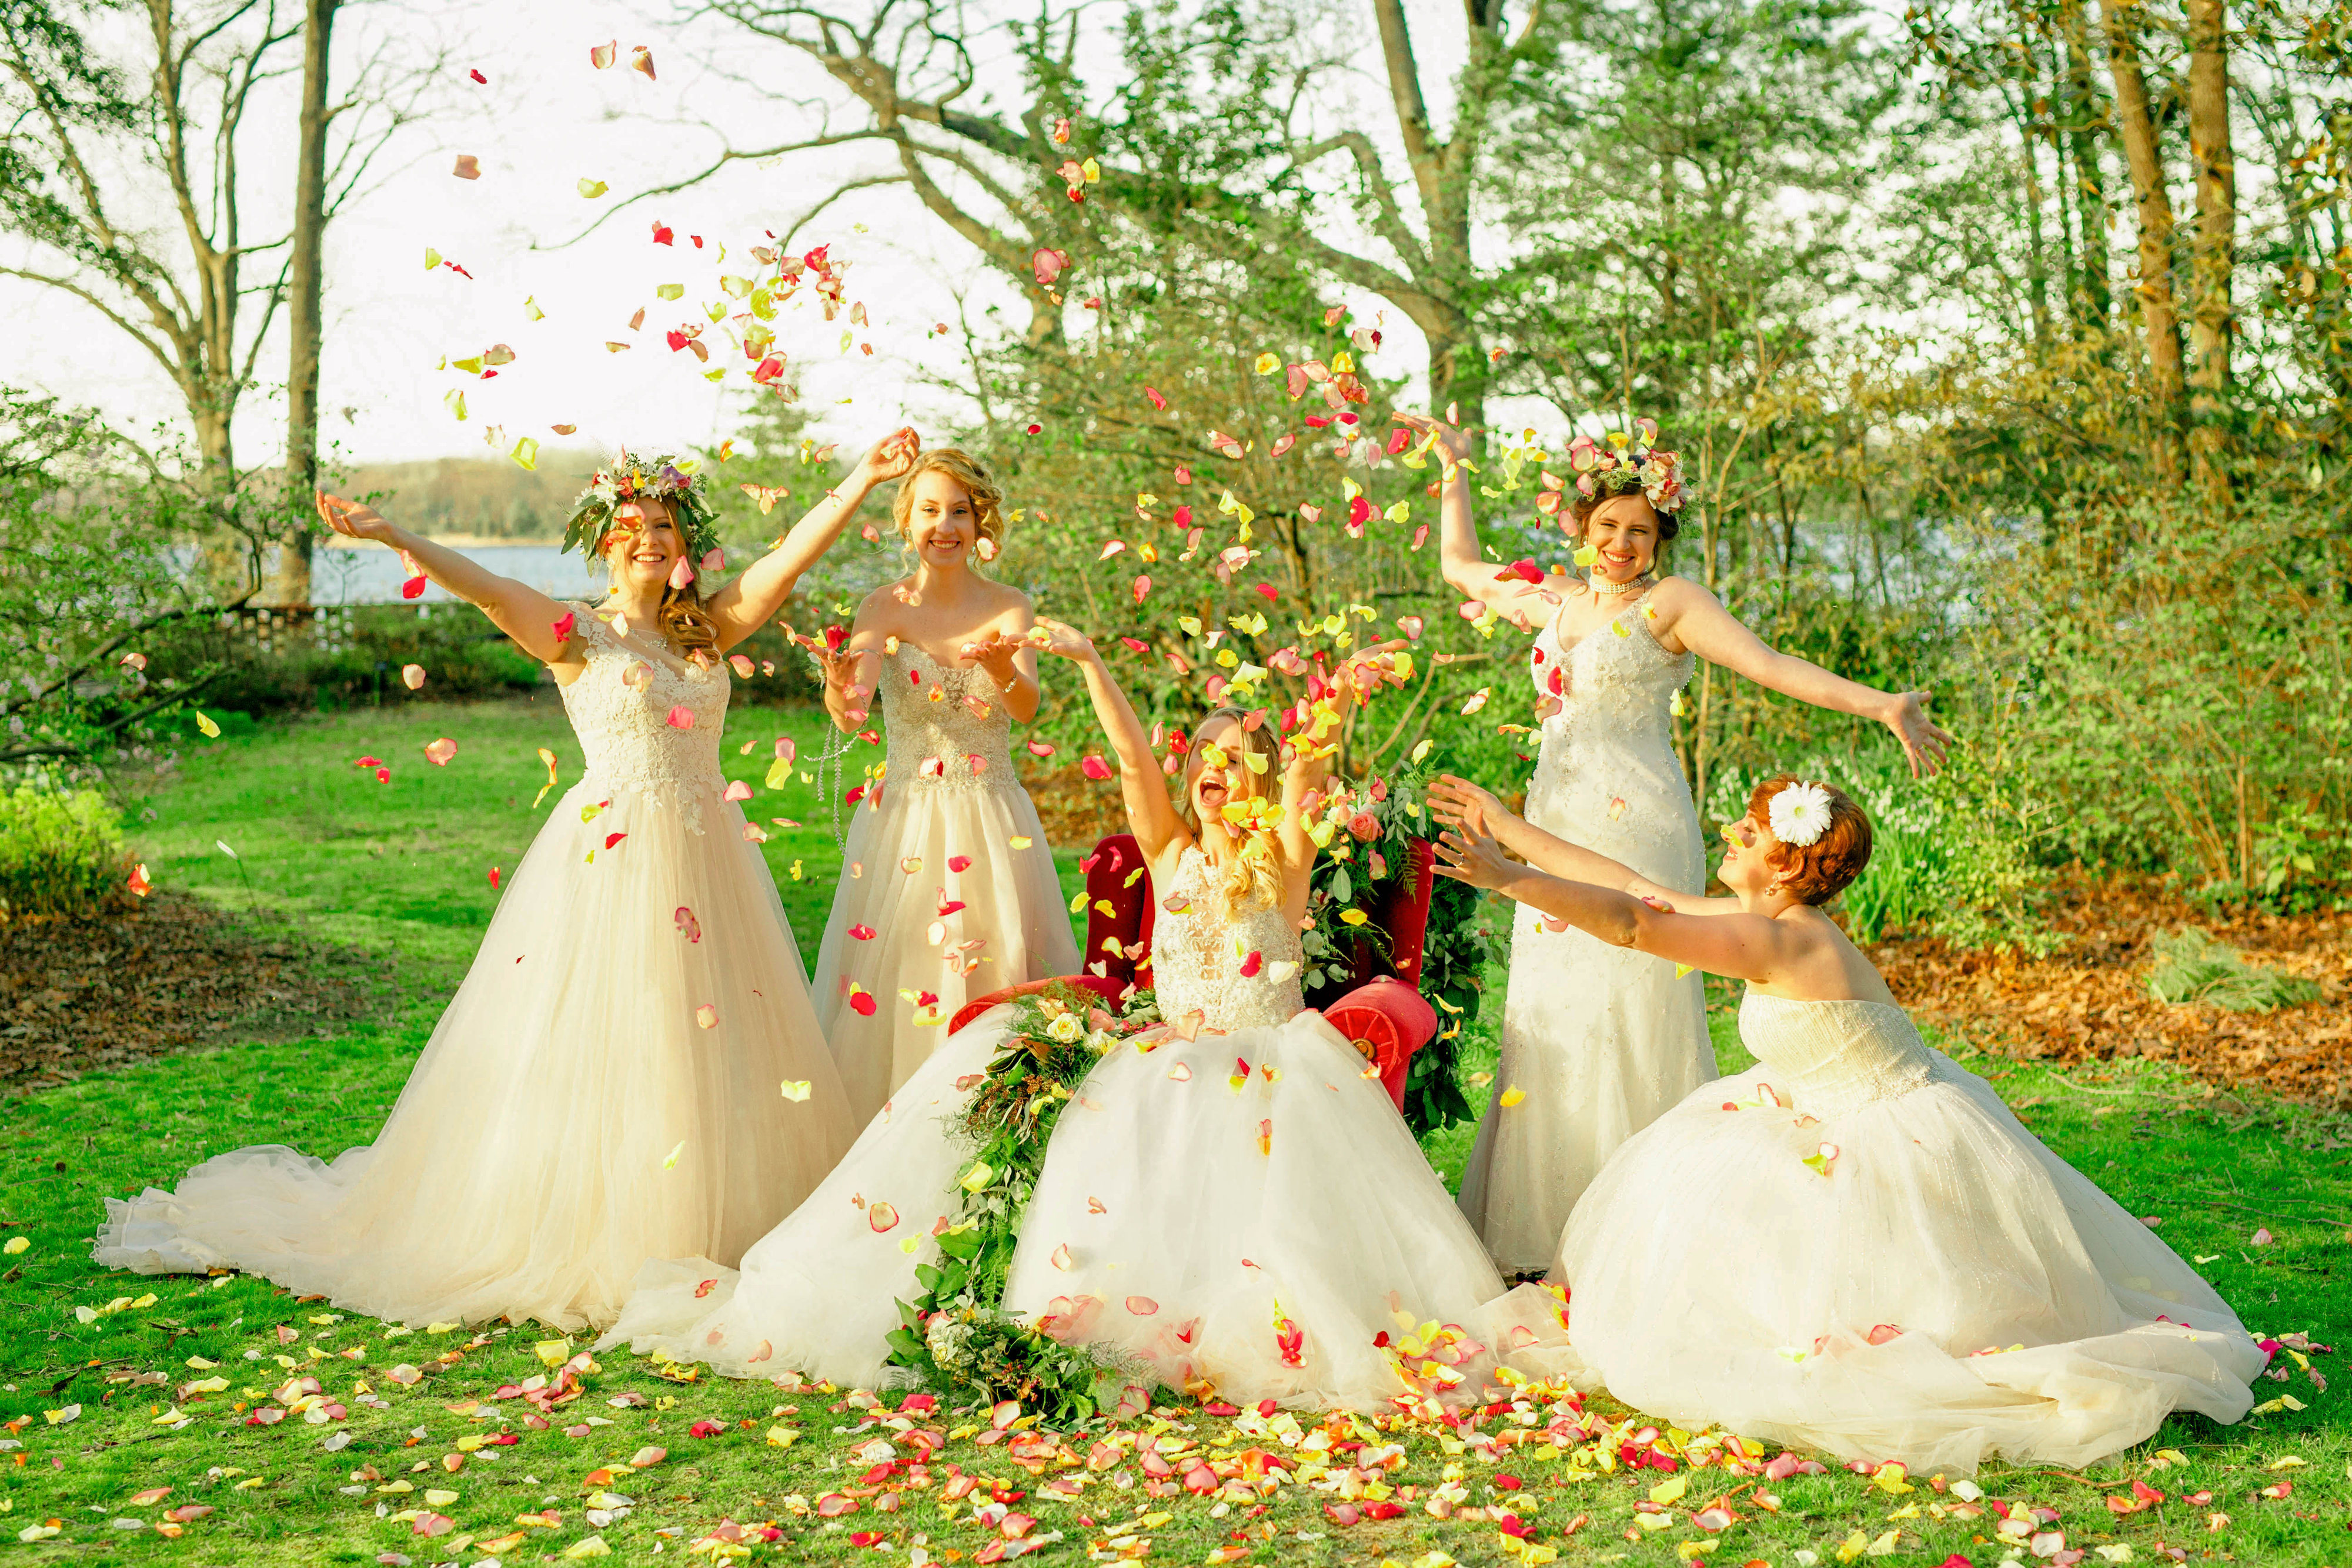 Bridal portraits in a garden with 5 girls throwing rose petals